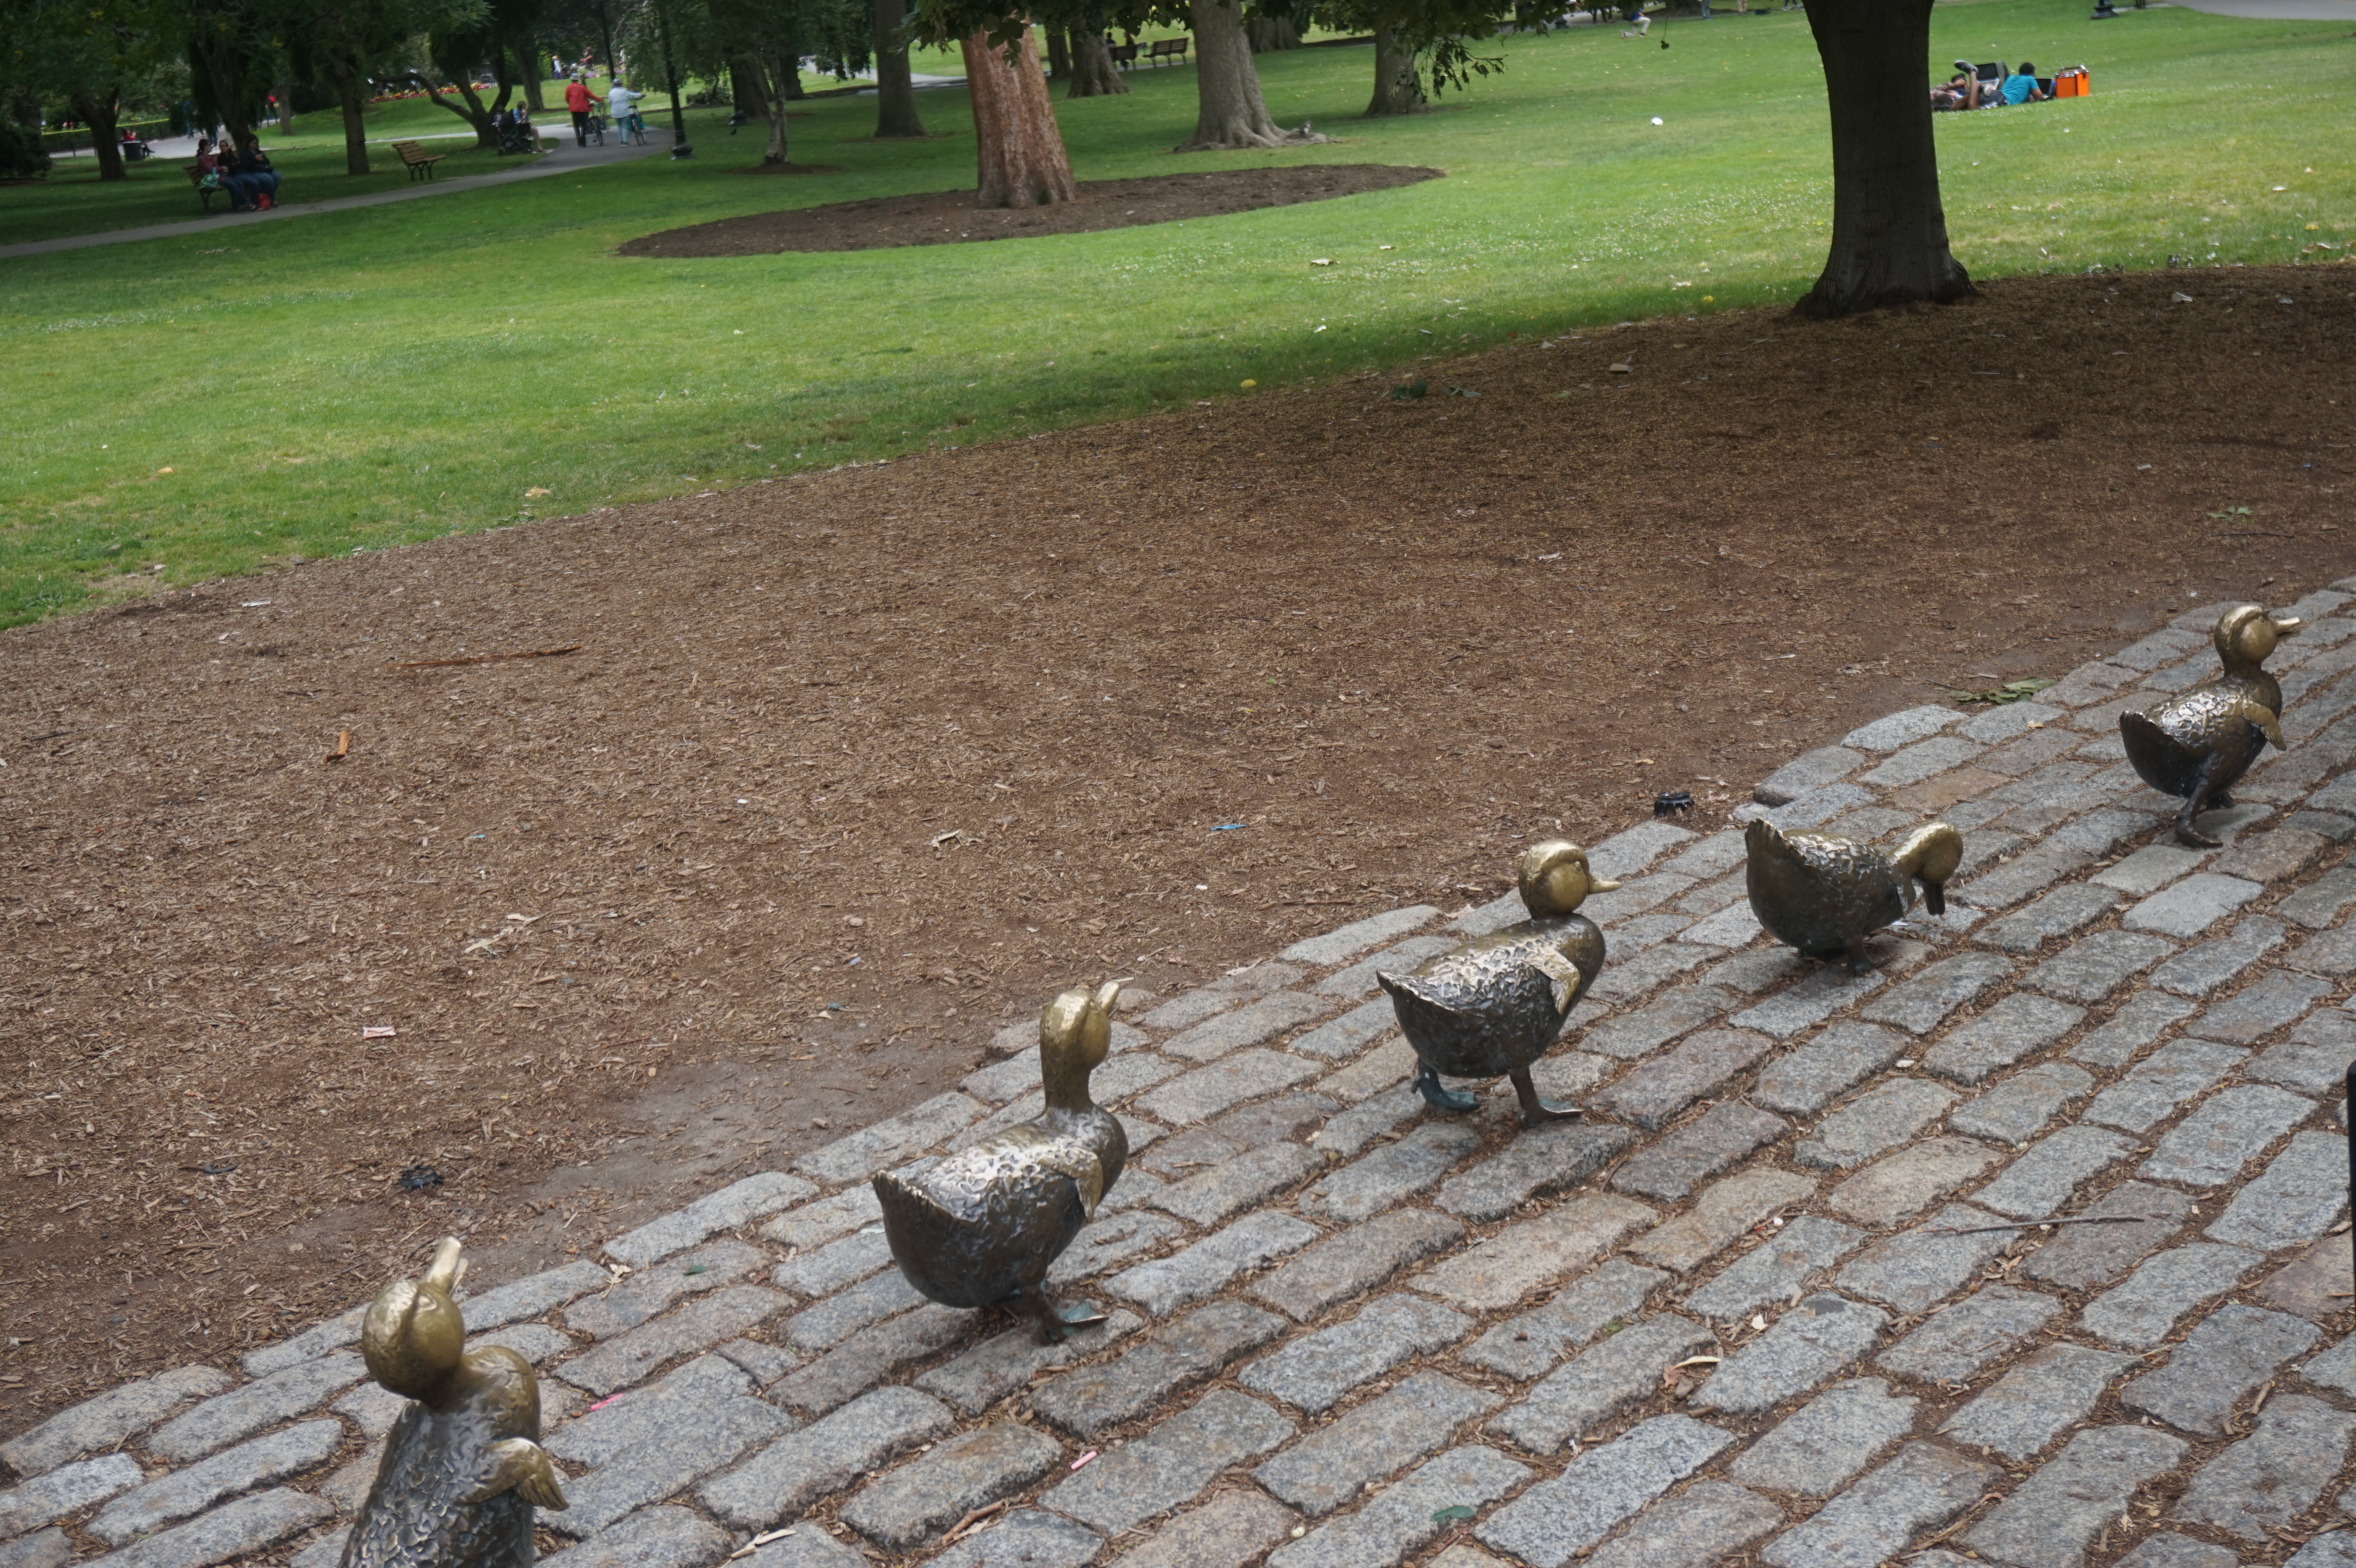 Okay. Make way for the ducklings